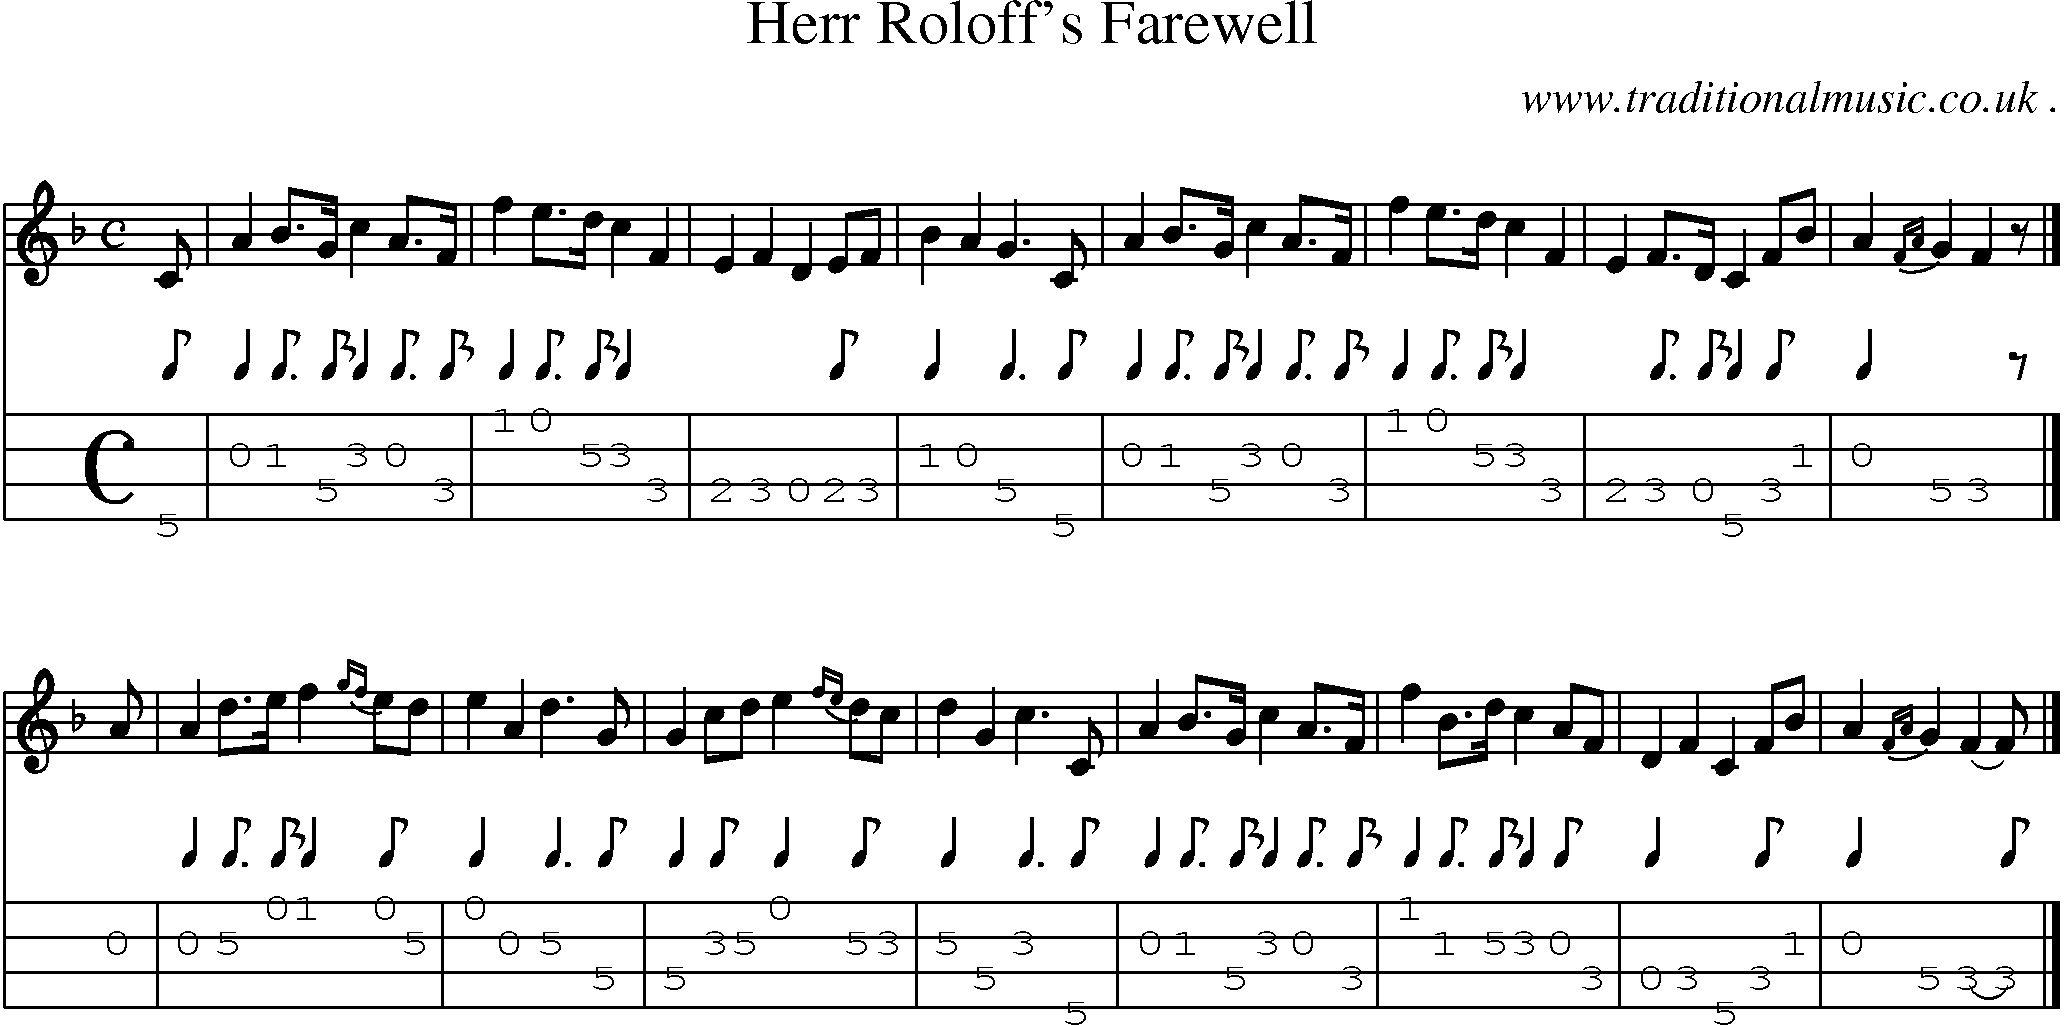 Sheet-music  score, Chords and Mandolin Tabs for Herr Roloffs Farewell